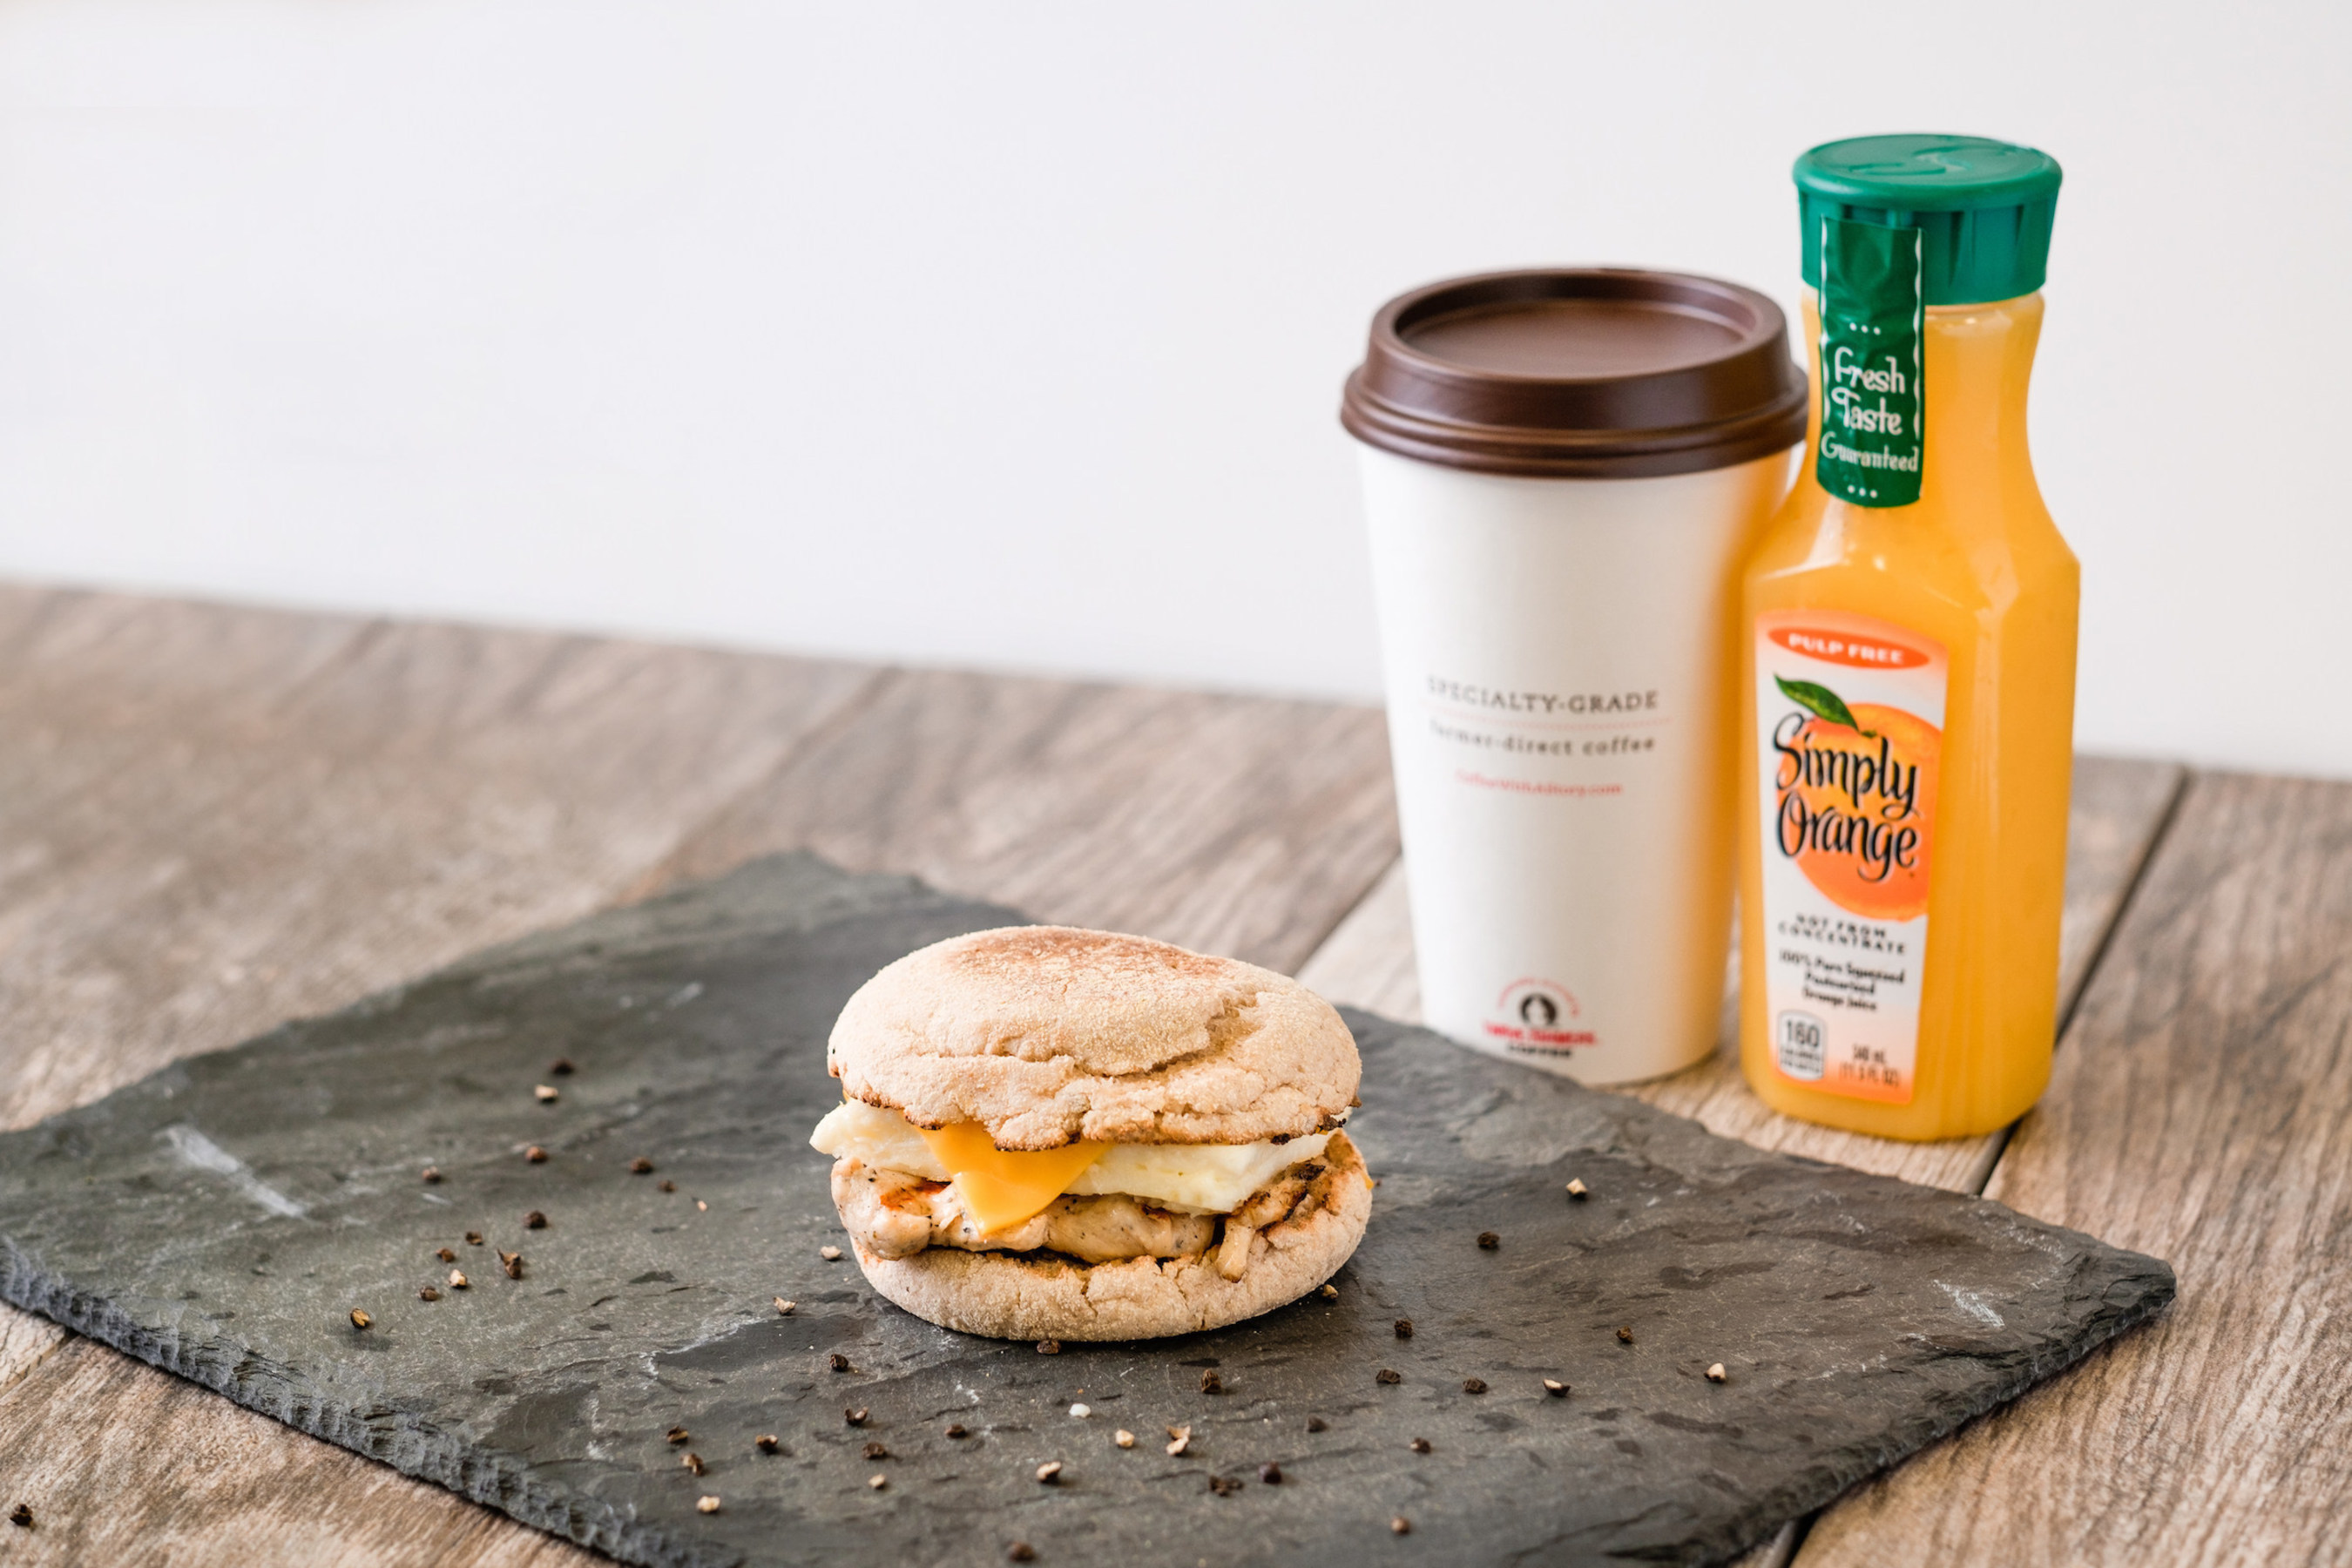 Chick-fil-A One app users to receive choice of free Chick-fil-A Chicken Biscuit, Chick-n-Minis, or new Egg White Grill breakfast sandwich during September.